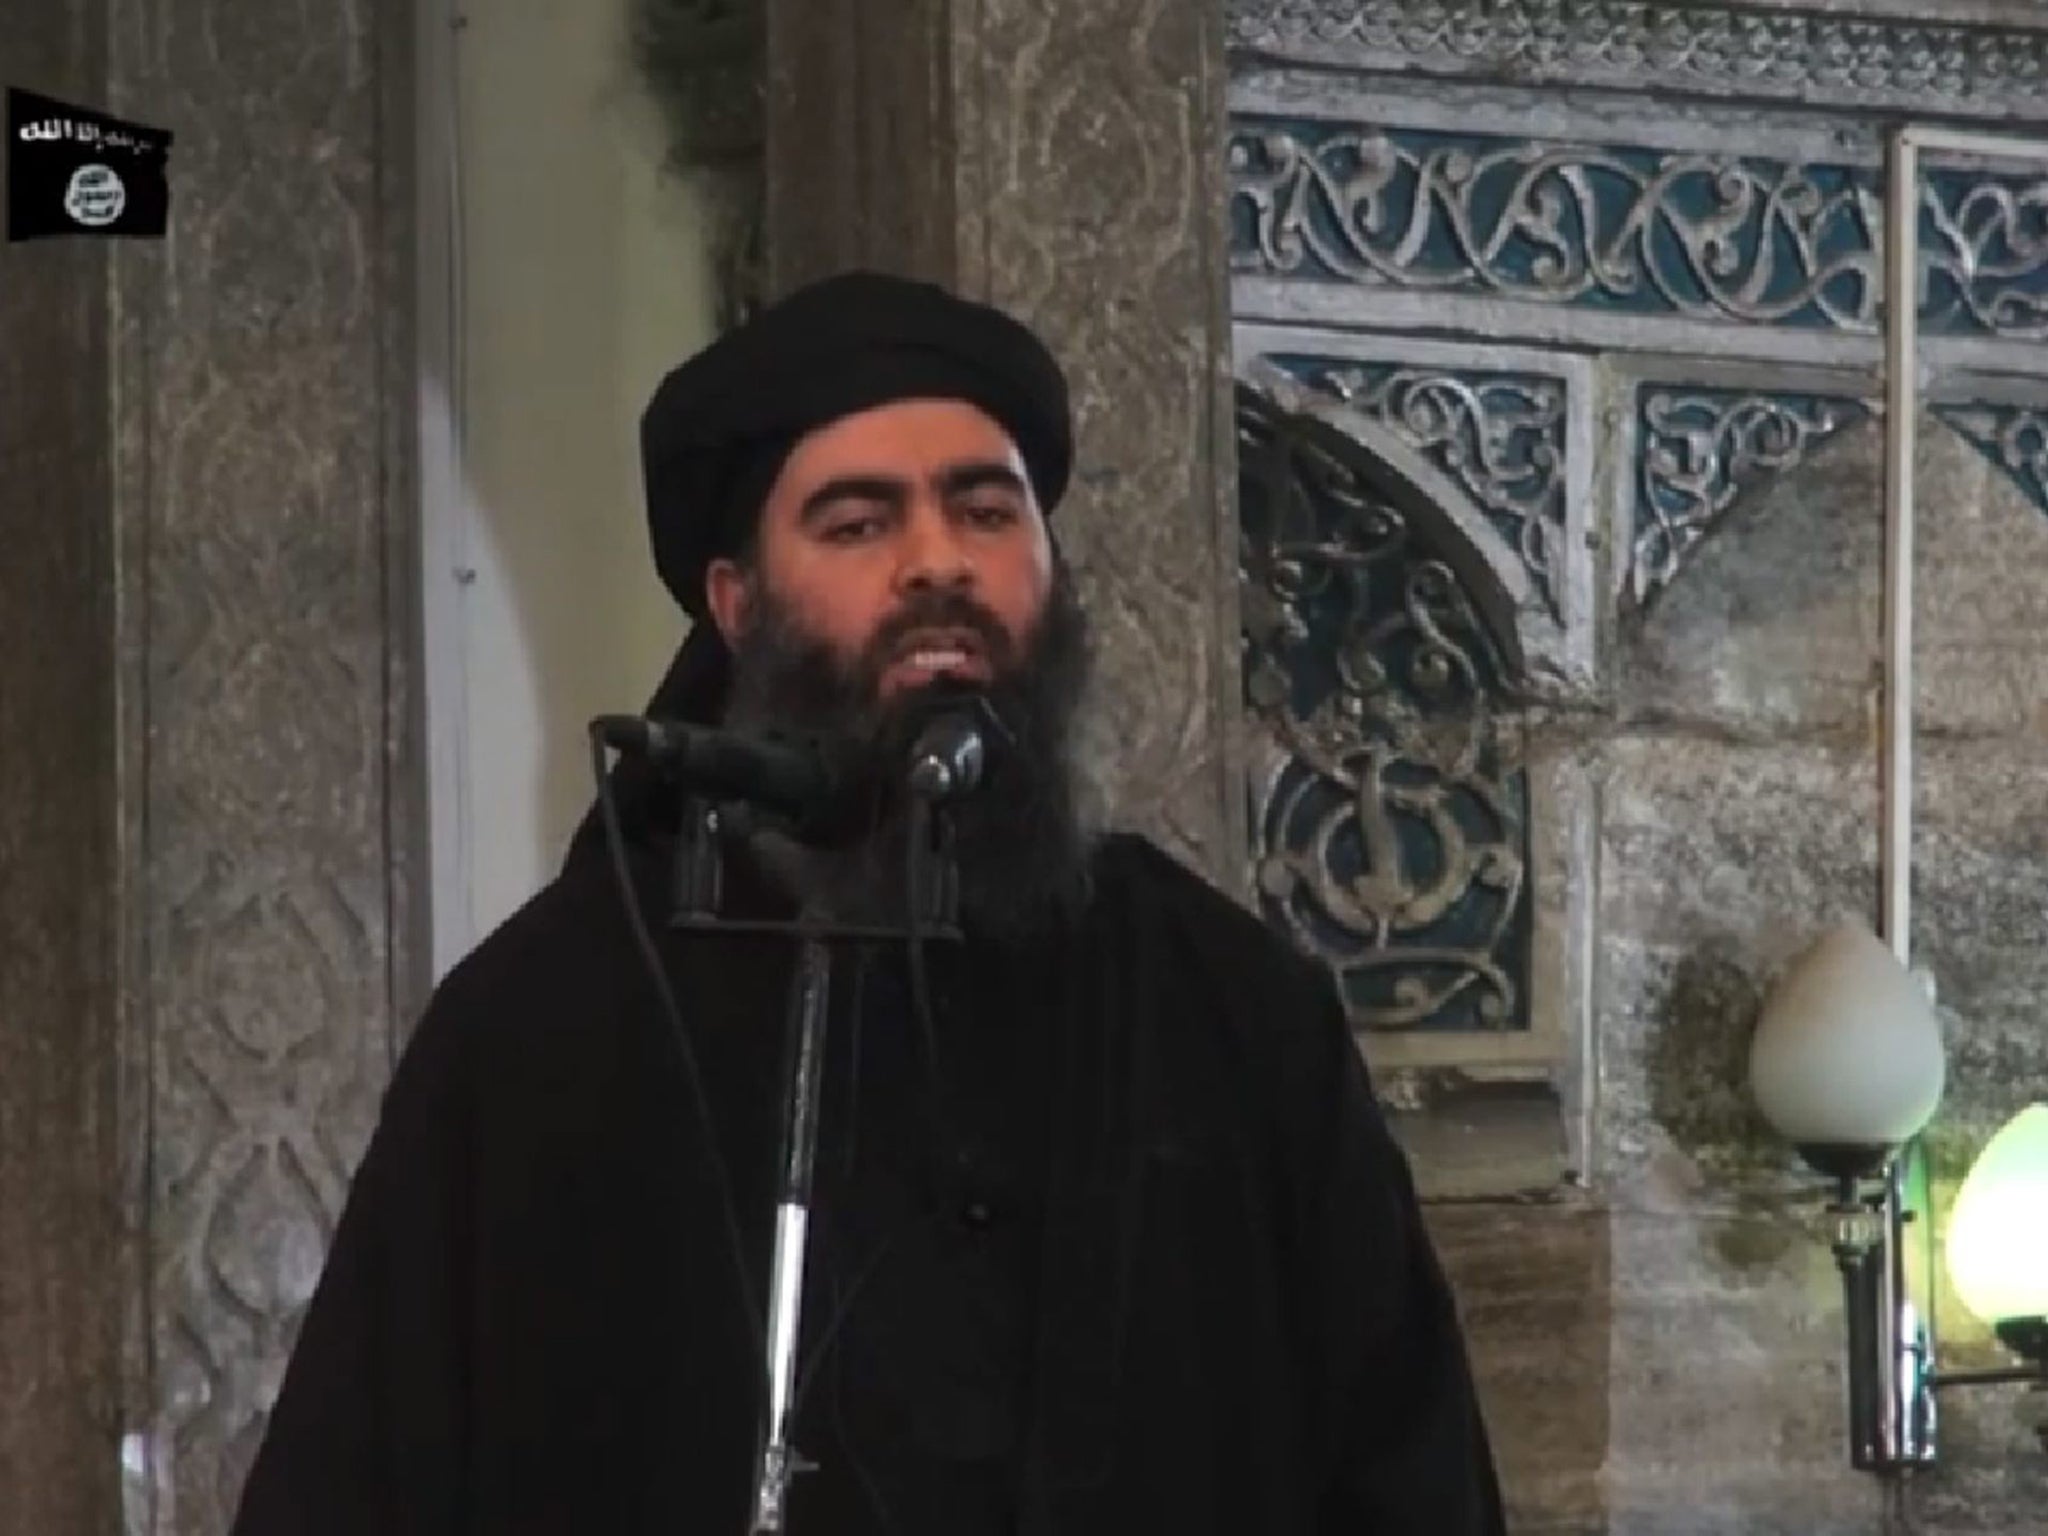 Abu Bakr al-Baghdadi declared an Islamist caliphate in the territory under the group's control in Iraq and Syria 